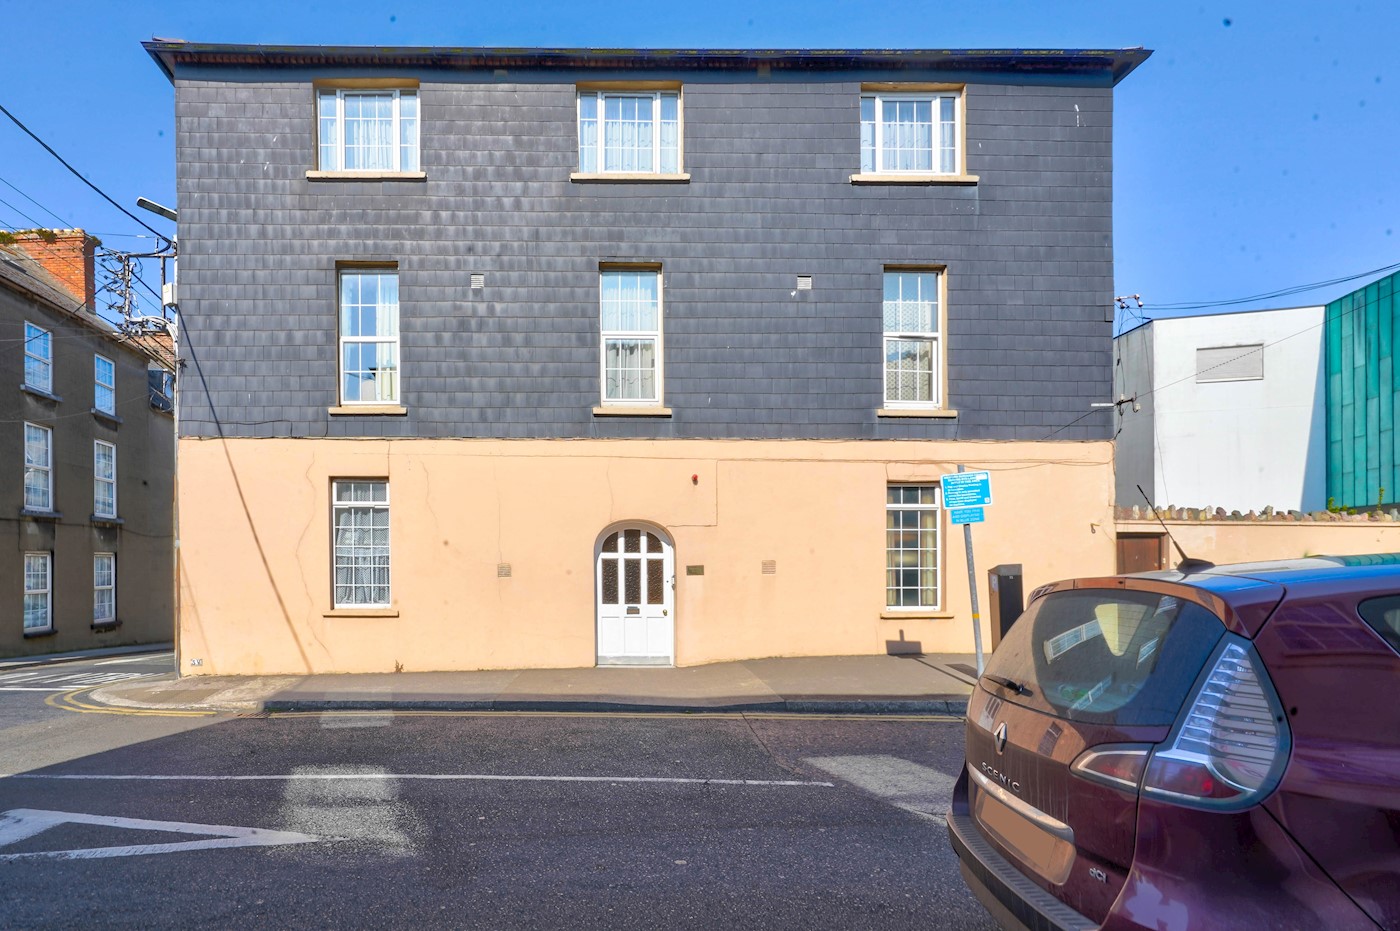 Apartment 2, Pembroke House, Abbey Street, Wexford, Co. Wexford, Y35 CX52 1/2